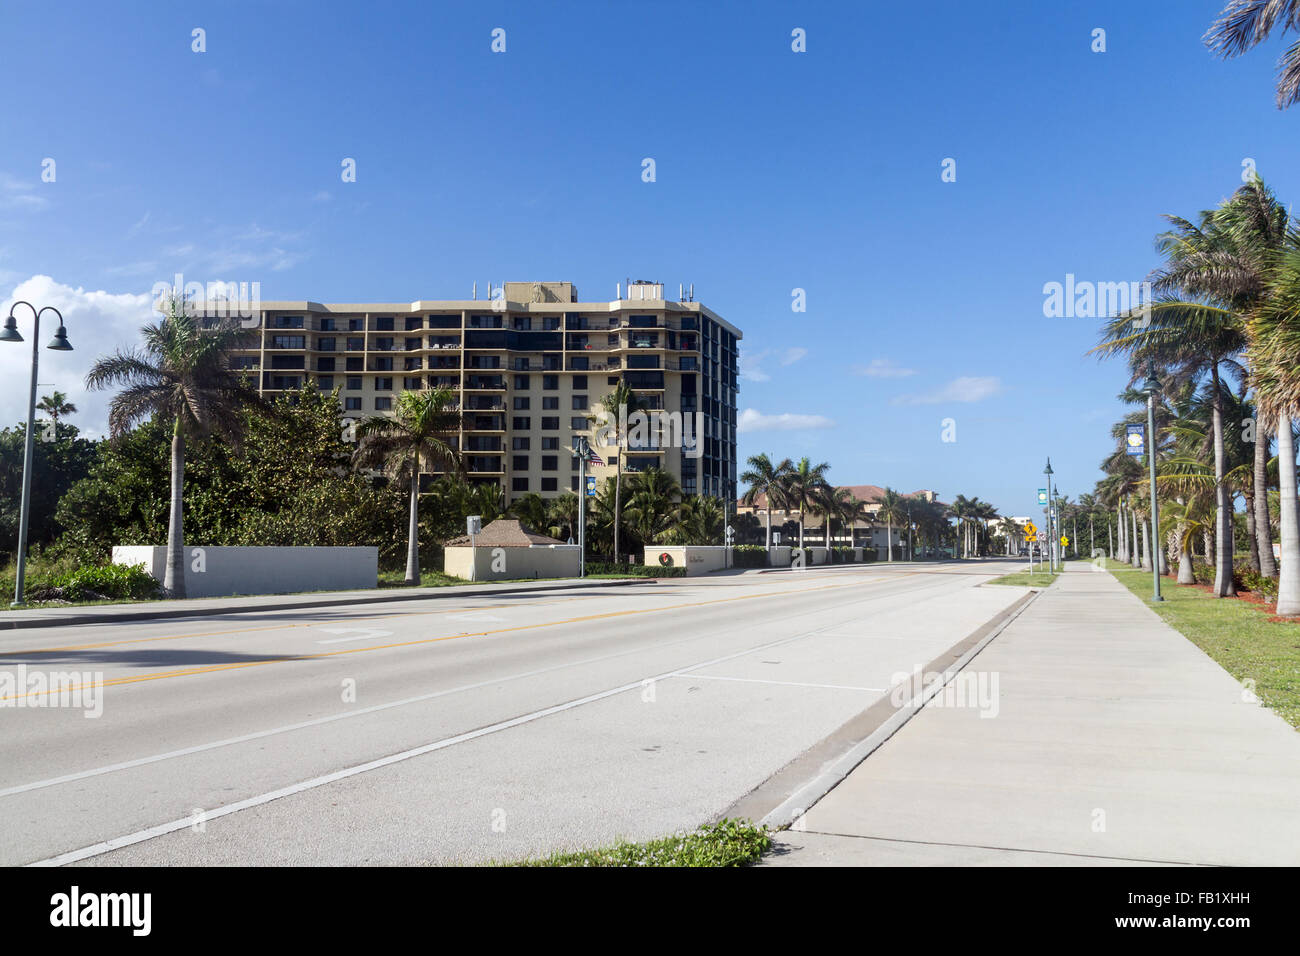 Fort Pierce, Florida, USA - December 28, 2015: view of Fort Pierce Florida road A1A in frond of South Beach Park at daytime Stock Photo